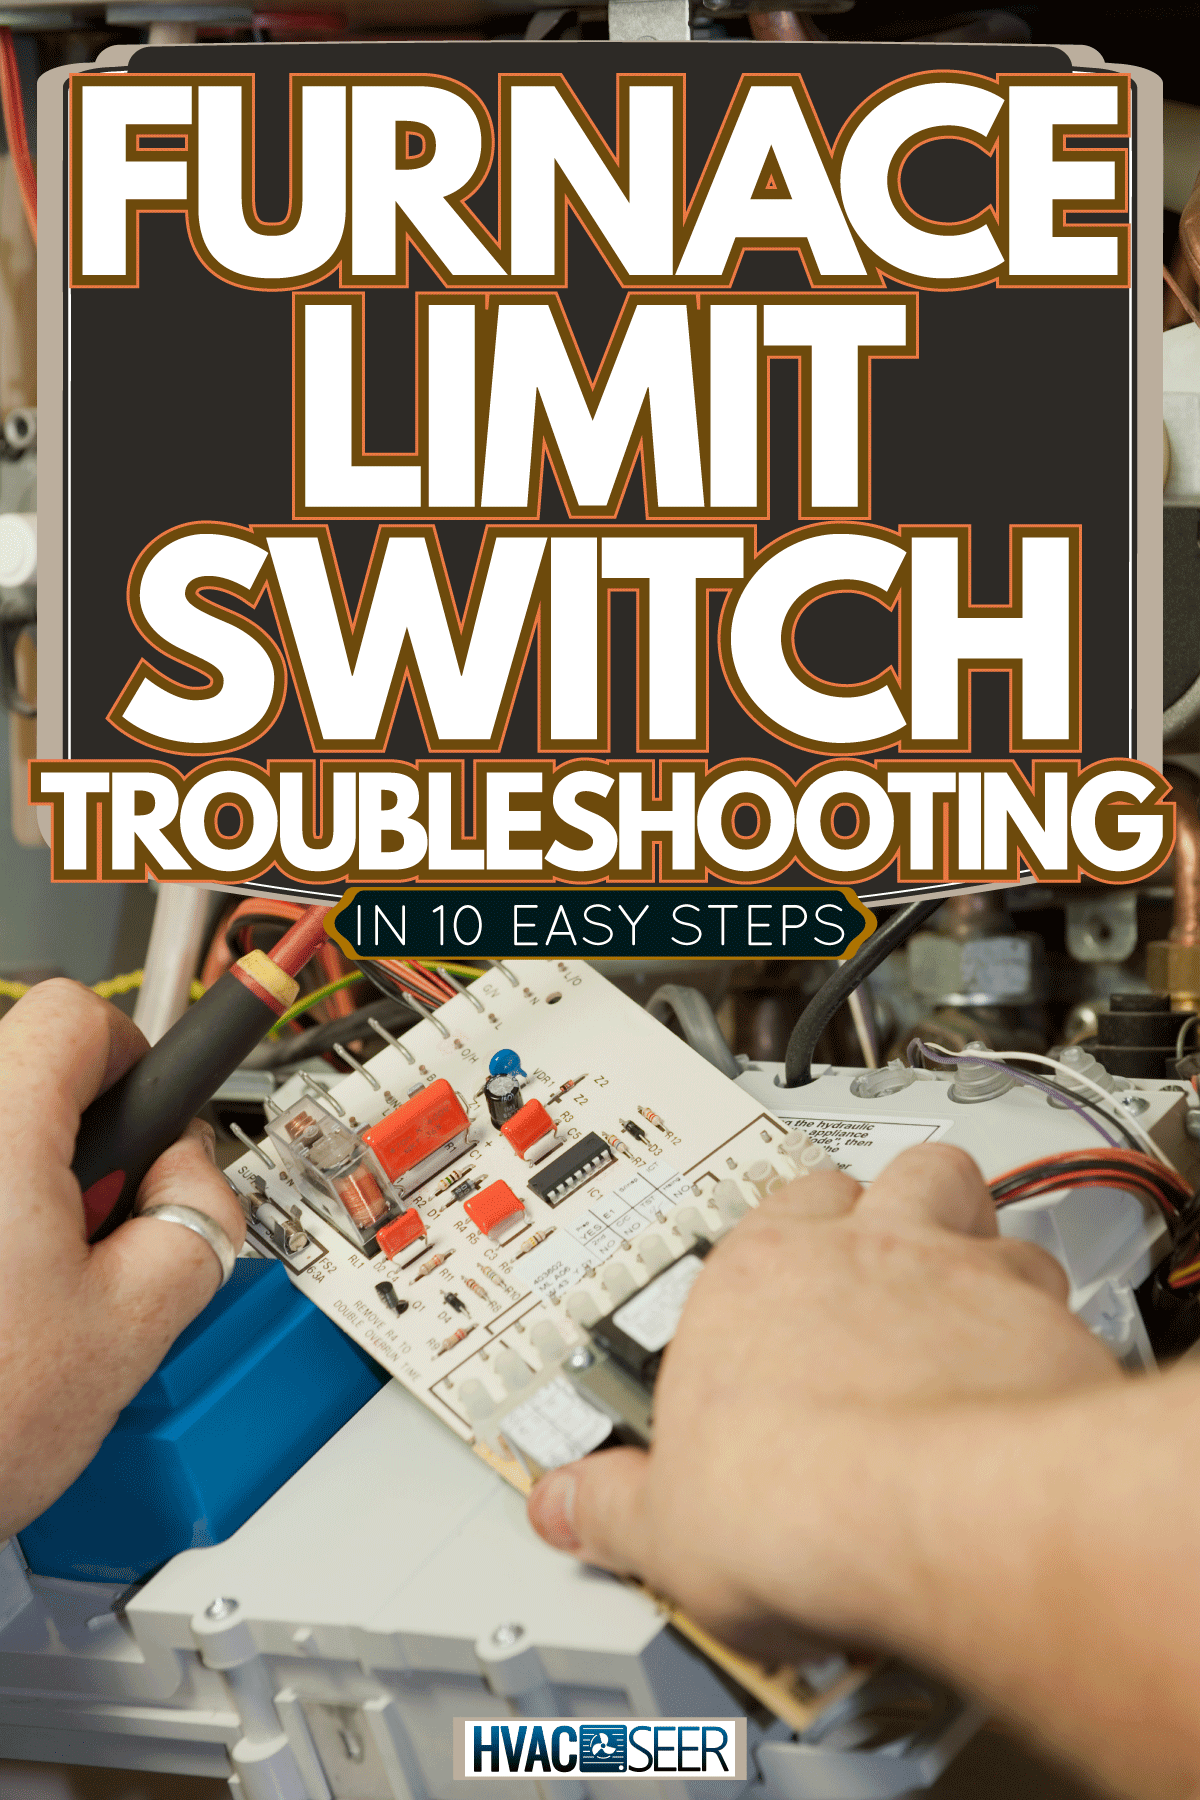 Hvac specialist running some diagnostics on the furnace. Furnace Limit Switch Troubleshooting [In 10 Easy Steps]